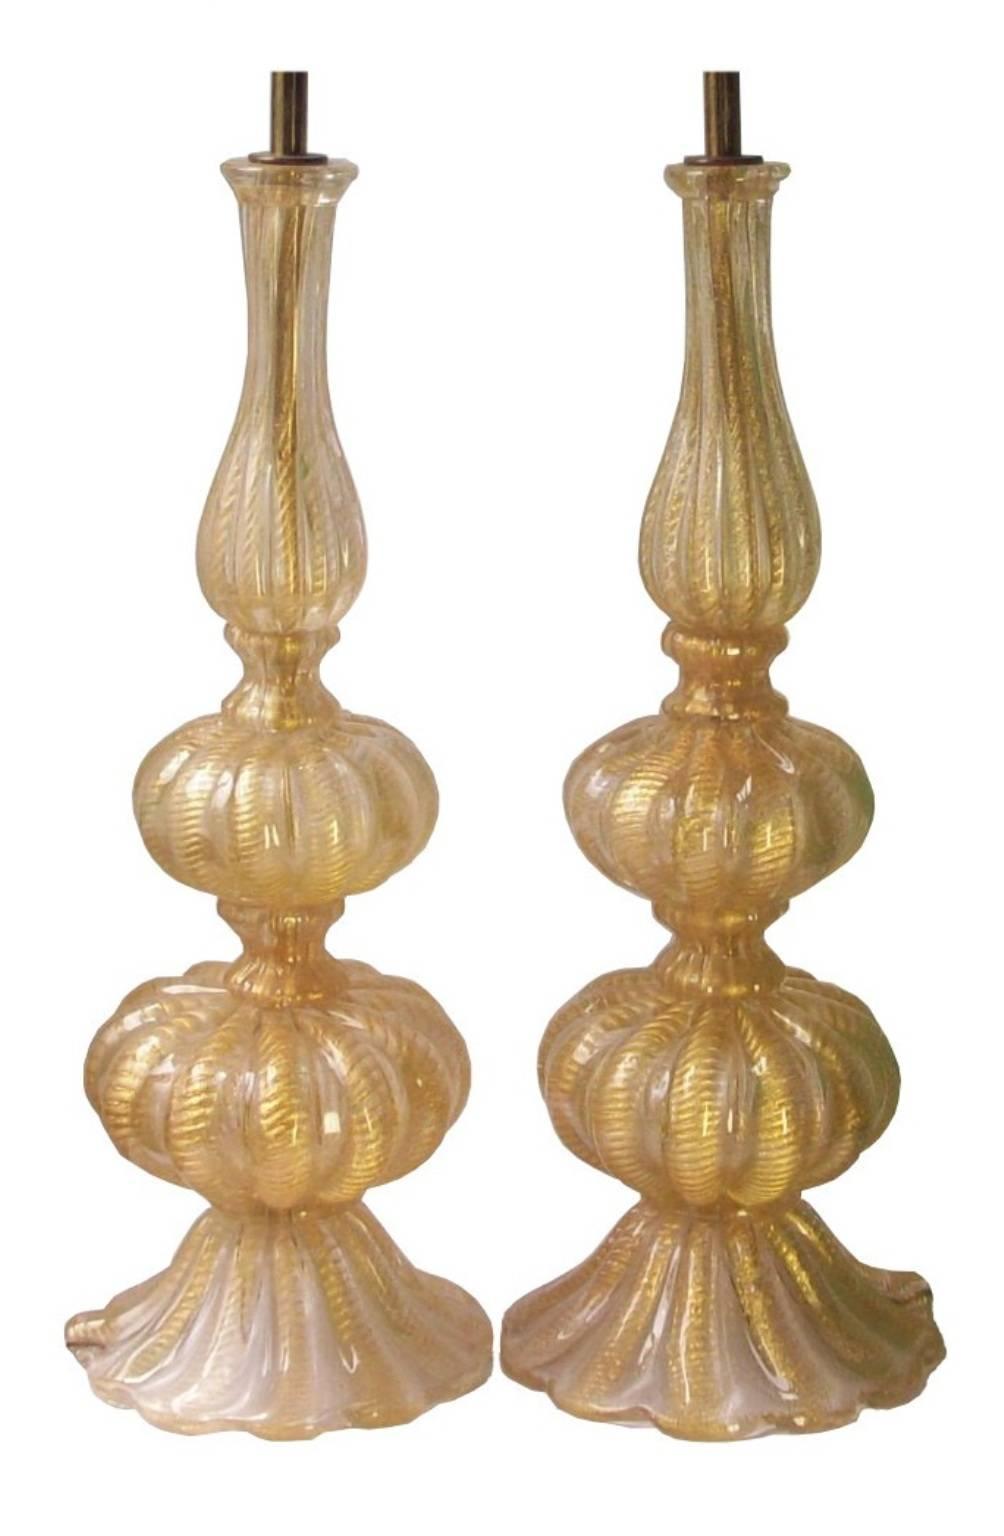 A pair of vintage Venetian hand-blown Murano glass table lamps, produced circa 1950s by Barovier and Toso, each with single sockets in brass hardware over gadrooned baluster form bodies, with 'cordonato d'oro' gold leaf infusions. Very good vintage